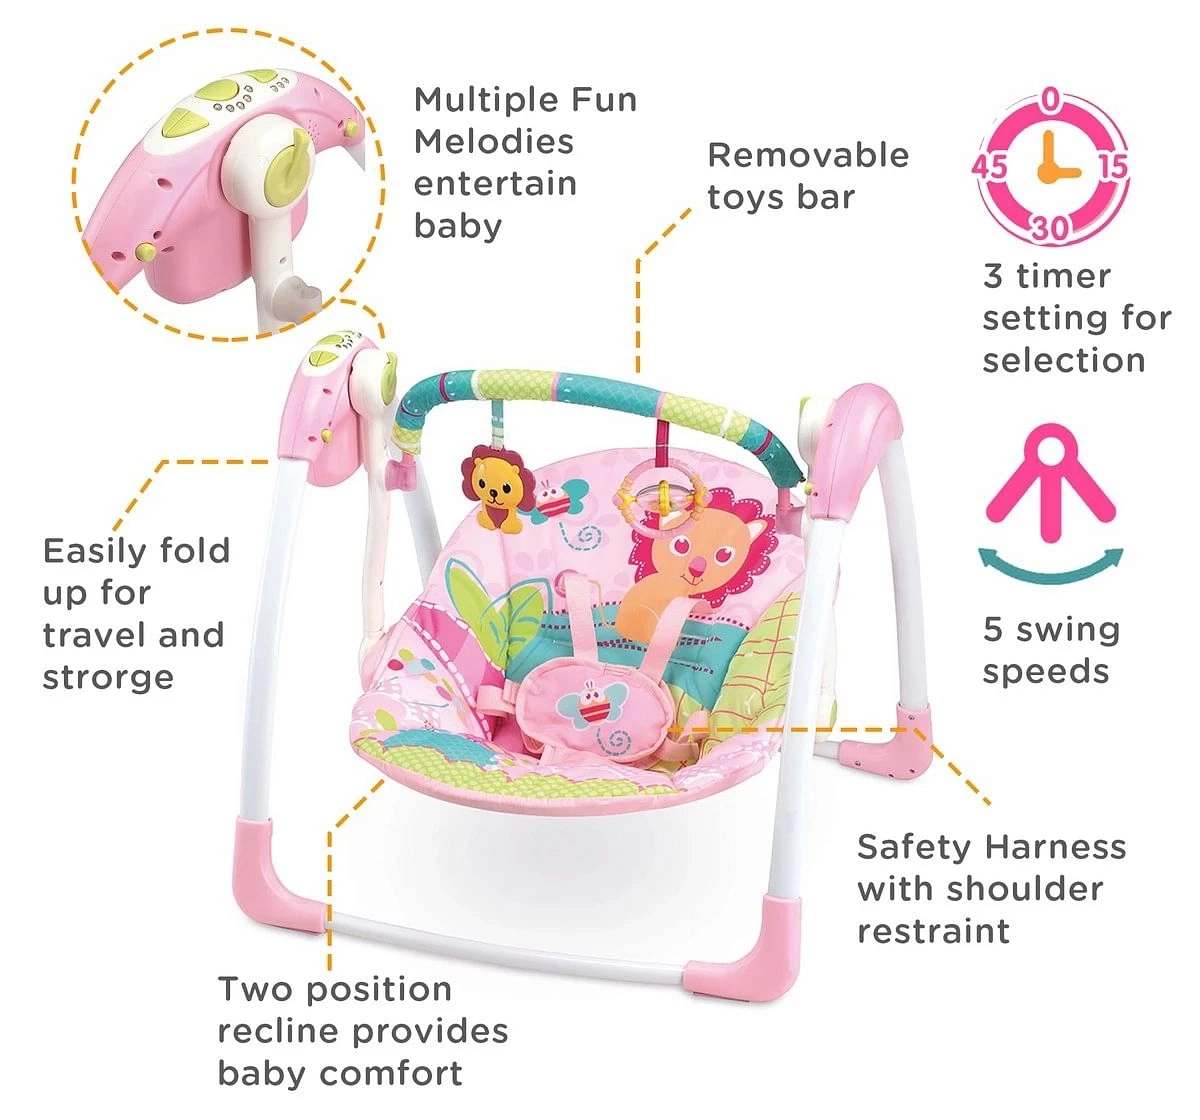 Mastela Deluxe Portable Electric Swing for kids 3M+, Pink